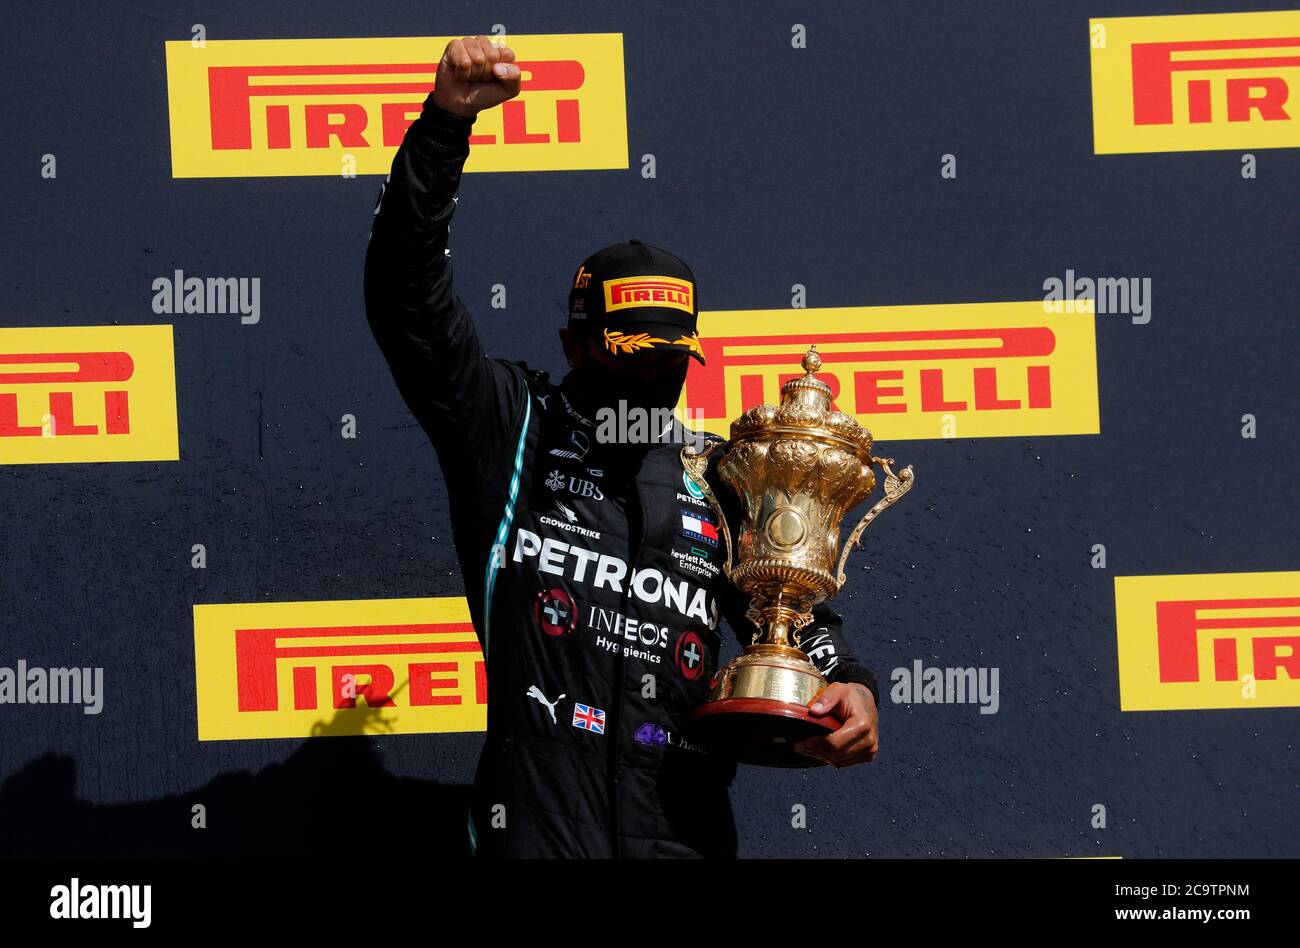 Race winner Lewis Hamilton of Mercedes celebrates after the 2020 British Grand Prix at Silverstone, Northamptonshire. Stock Photo